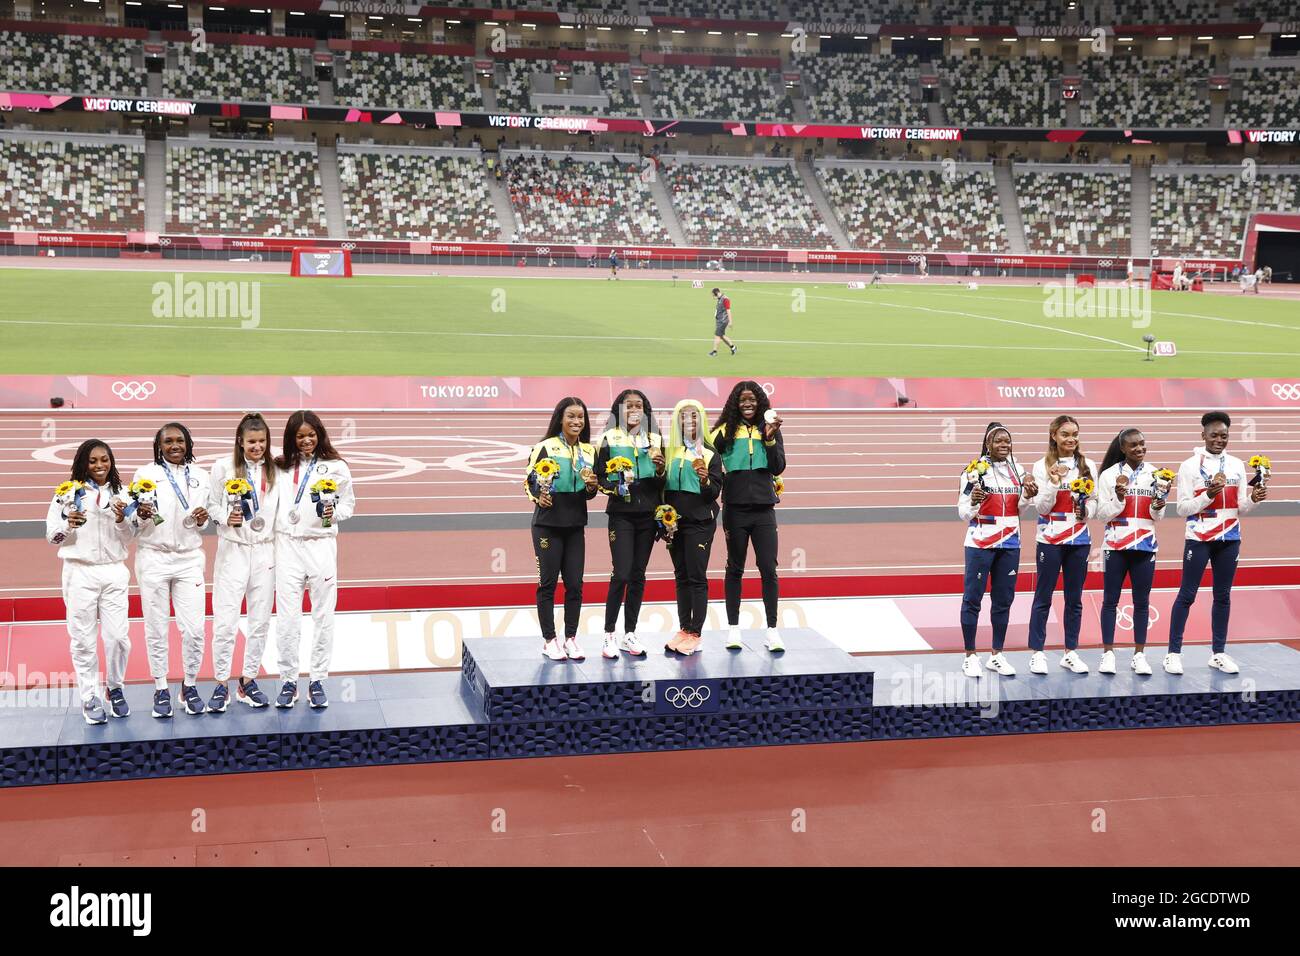 USA 2nd Silver Medal, Jamaica Winner Gold Medal, Great Britain 3rd Bronze Medal during the Olympic Games Tokyo 2020, Athletics Womens 4x100m Relay Medal Ceremony on August 7, 2021 at Olympic Stadium in Tokyo, Japan - Photo Yuya Nagase / Photo Kishimoto / DPPI Stock Photo